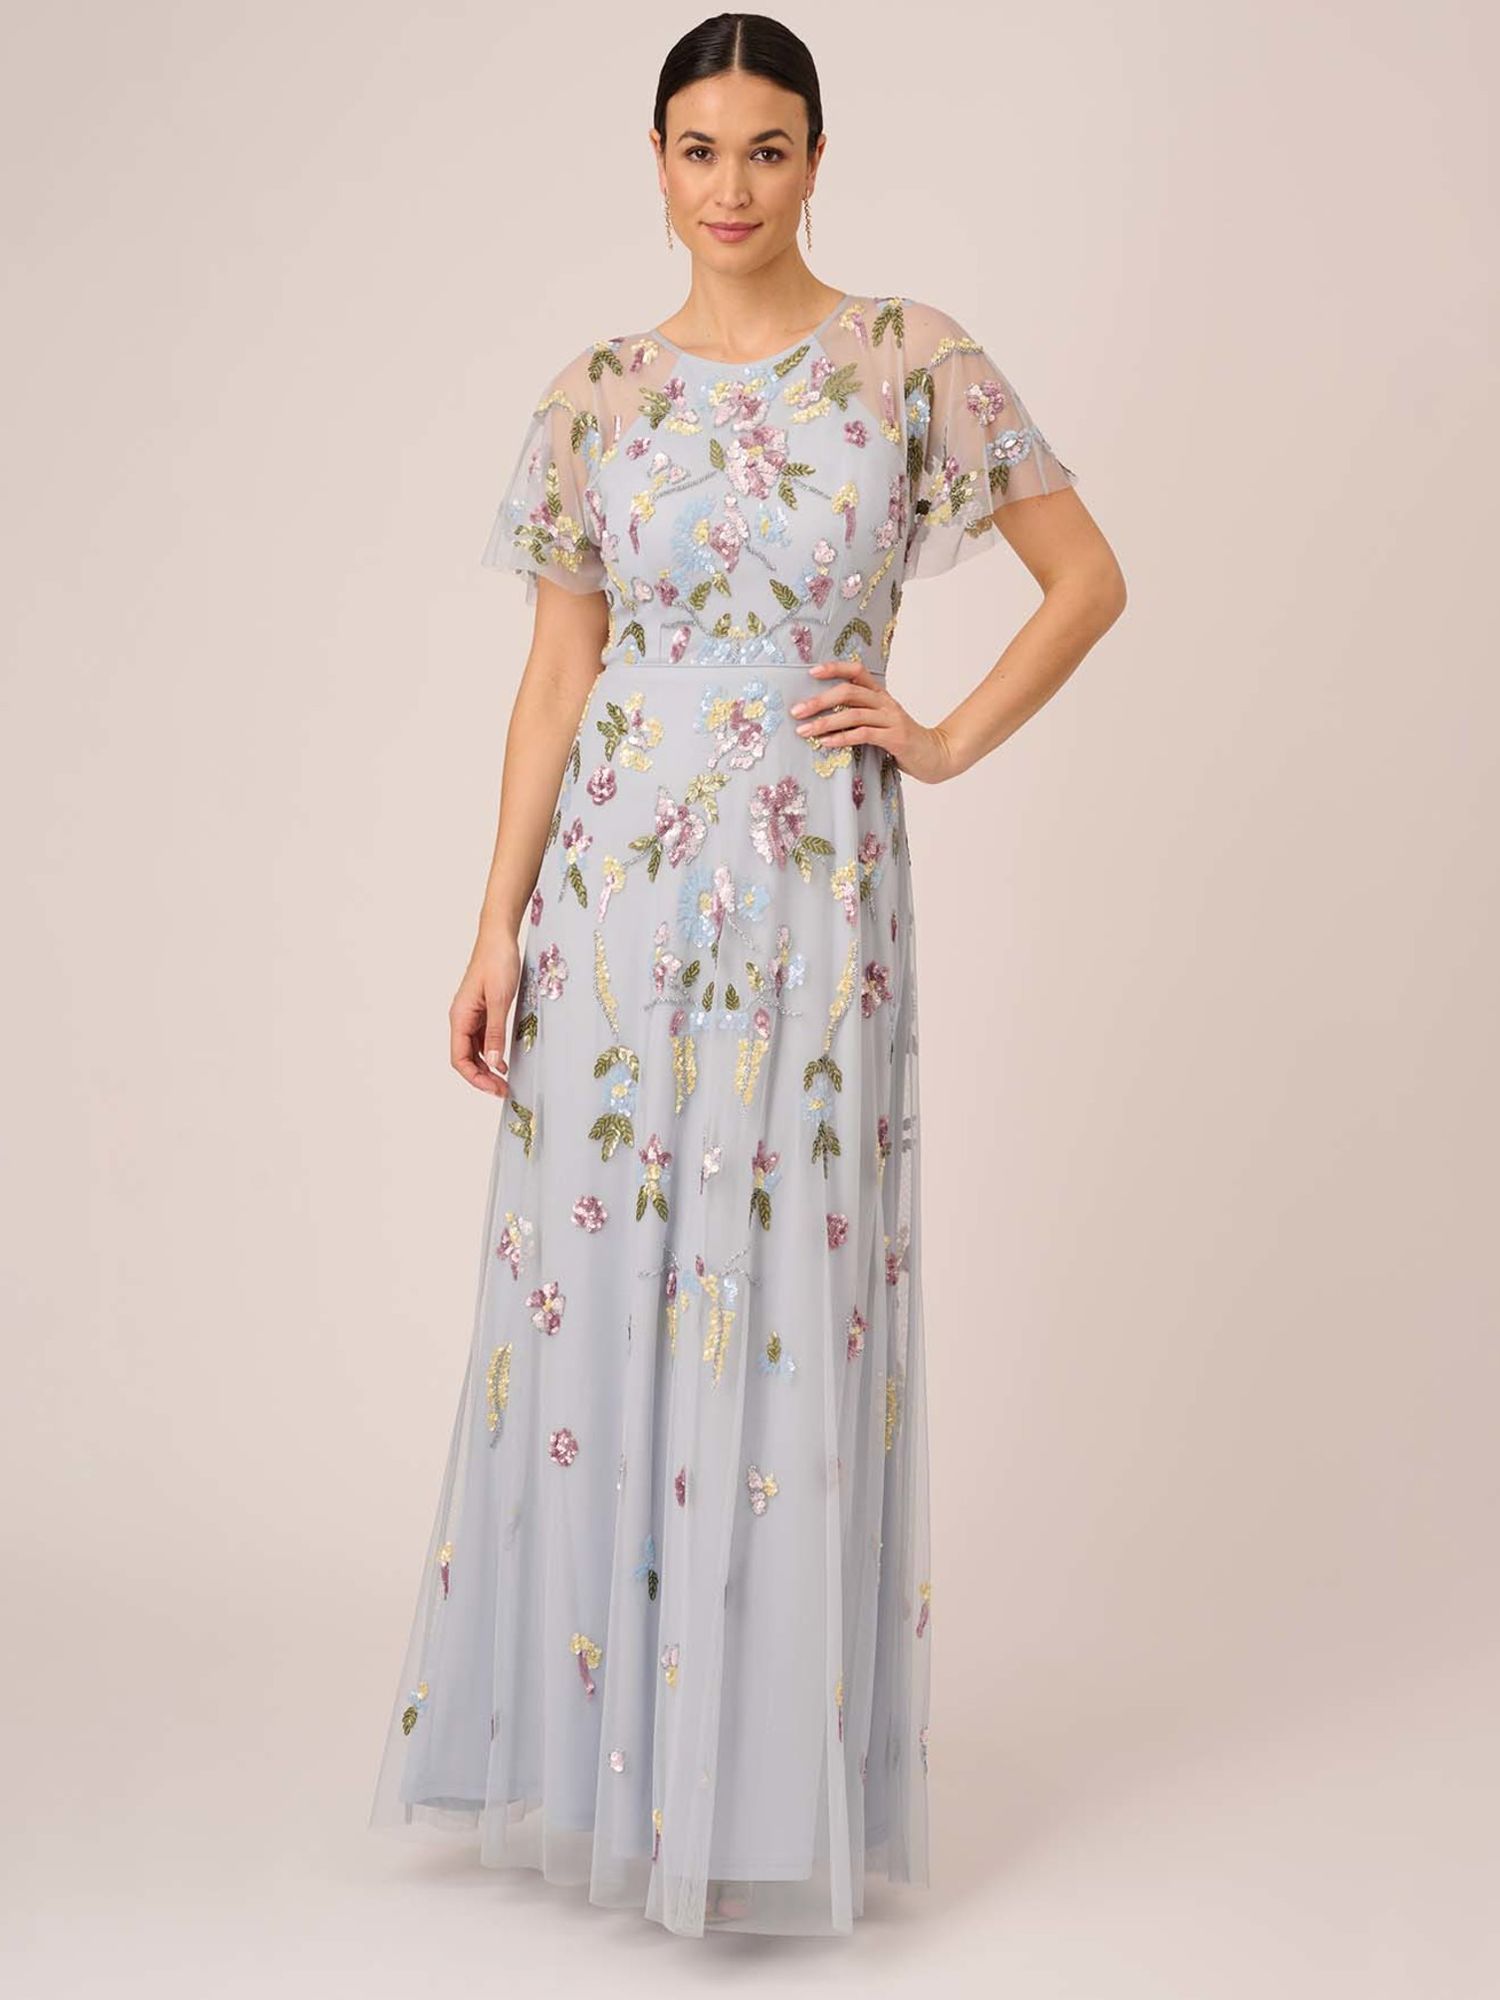 Elegant Gowns For Prom | John Lewis & Partners